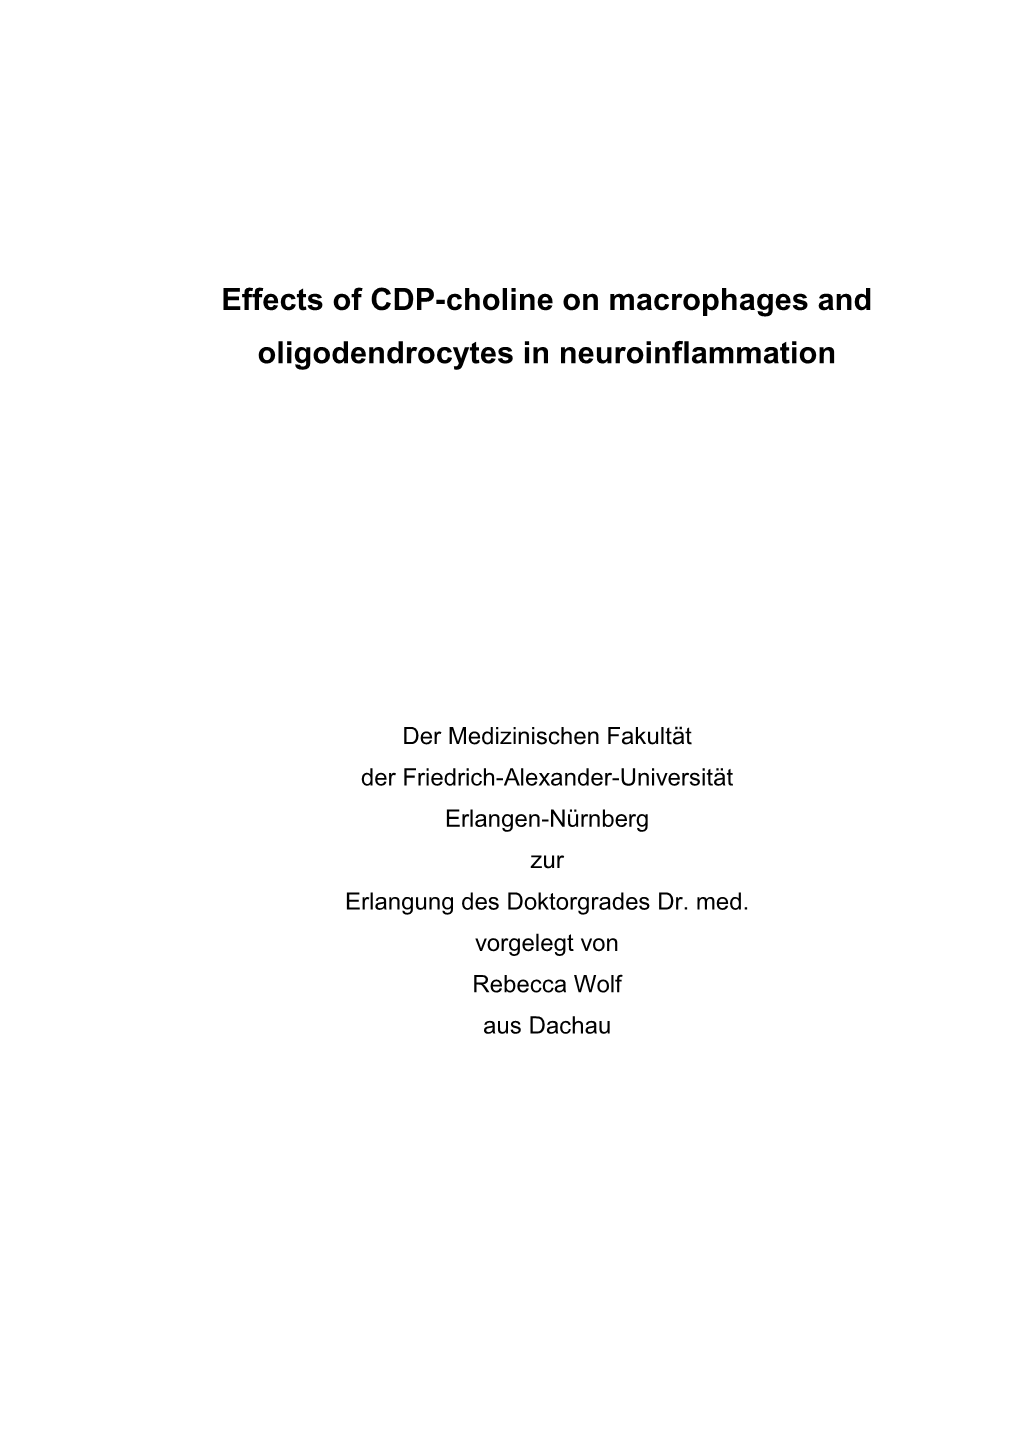 Effects of CDP-Choline on Macrophages and Oligodendrocytes in Neuroinflammation